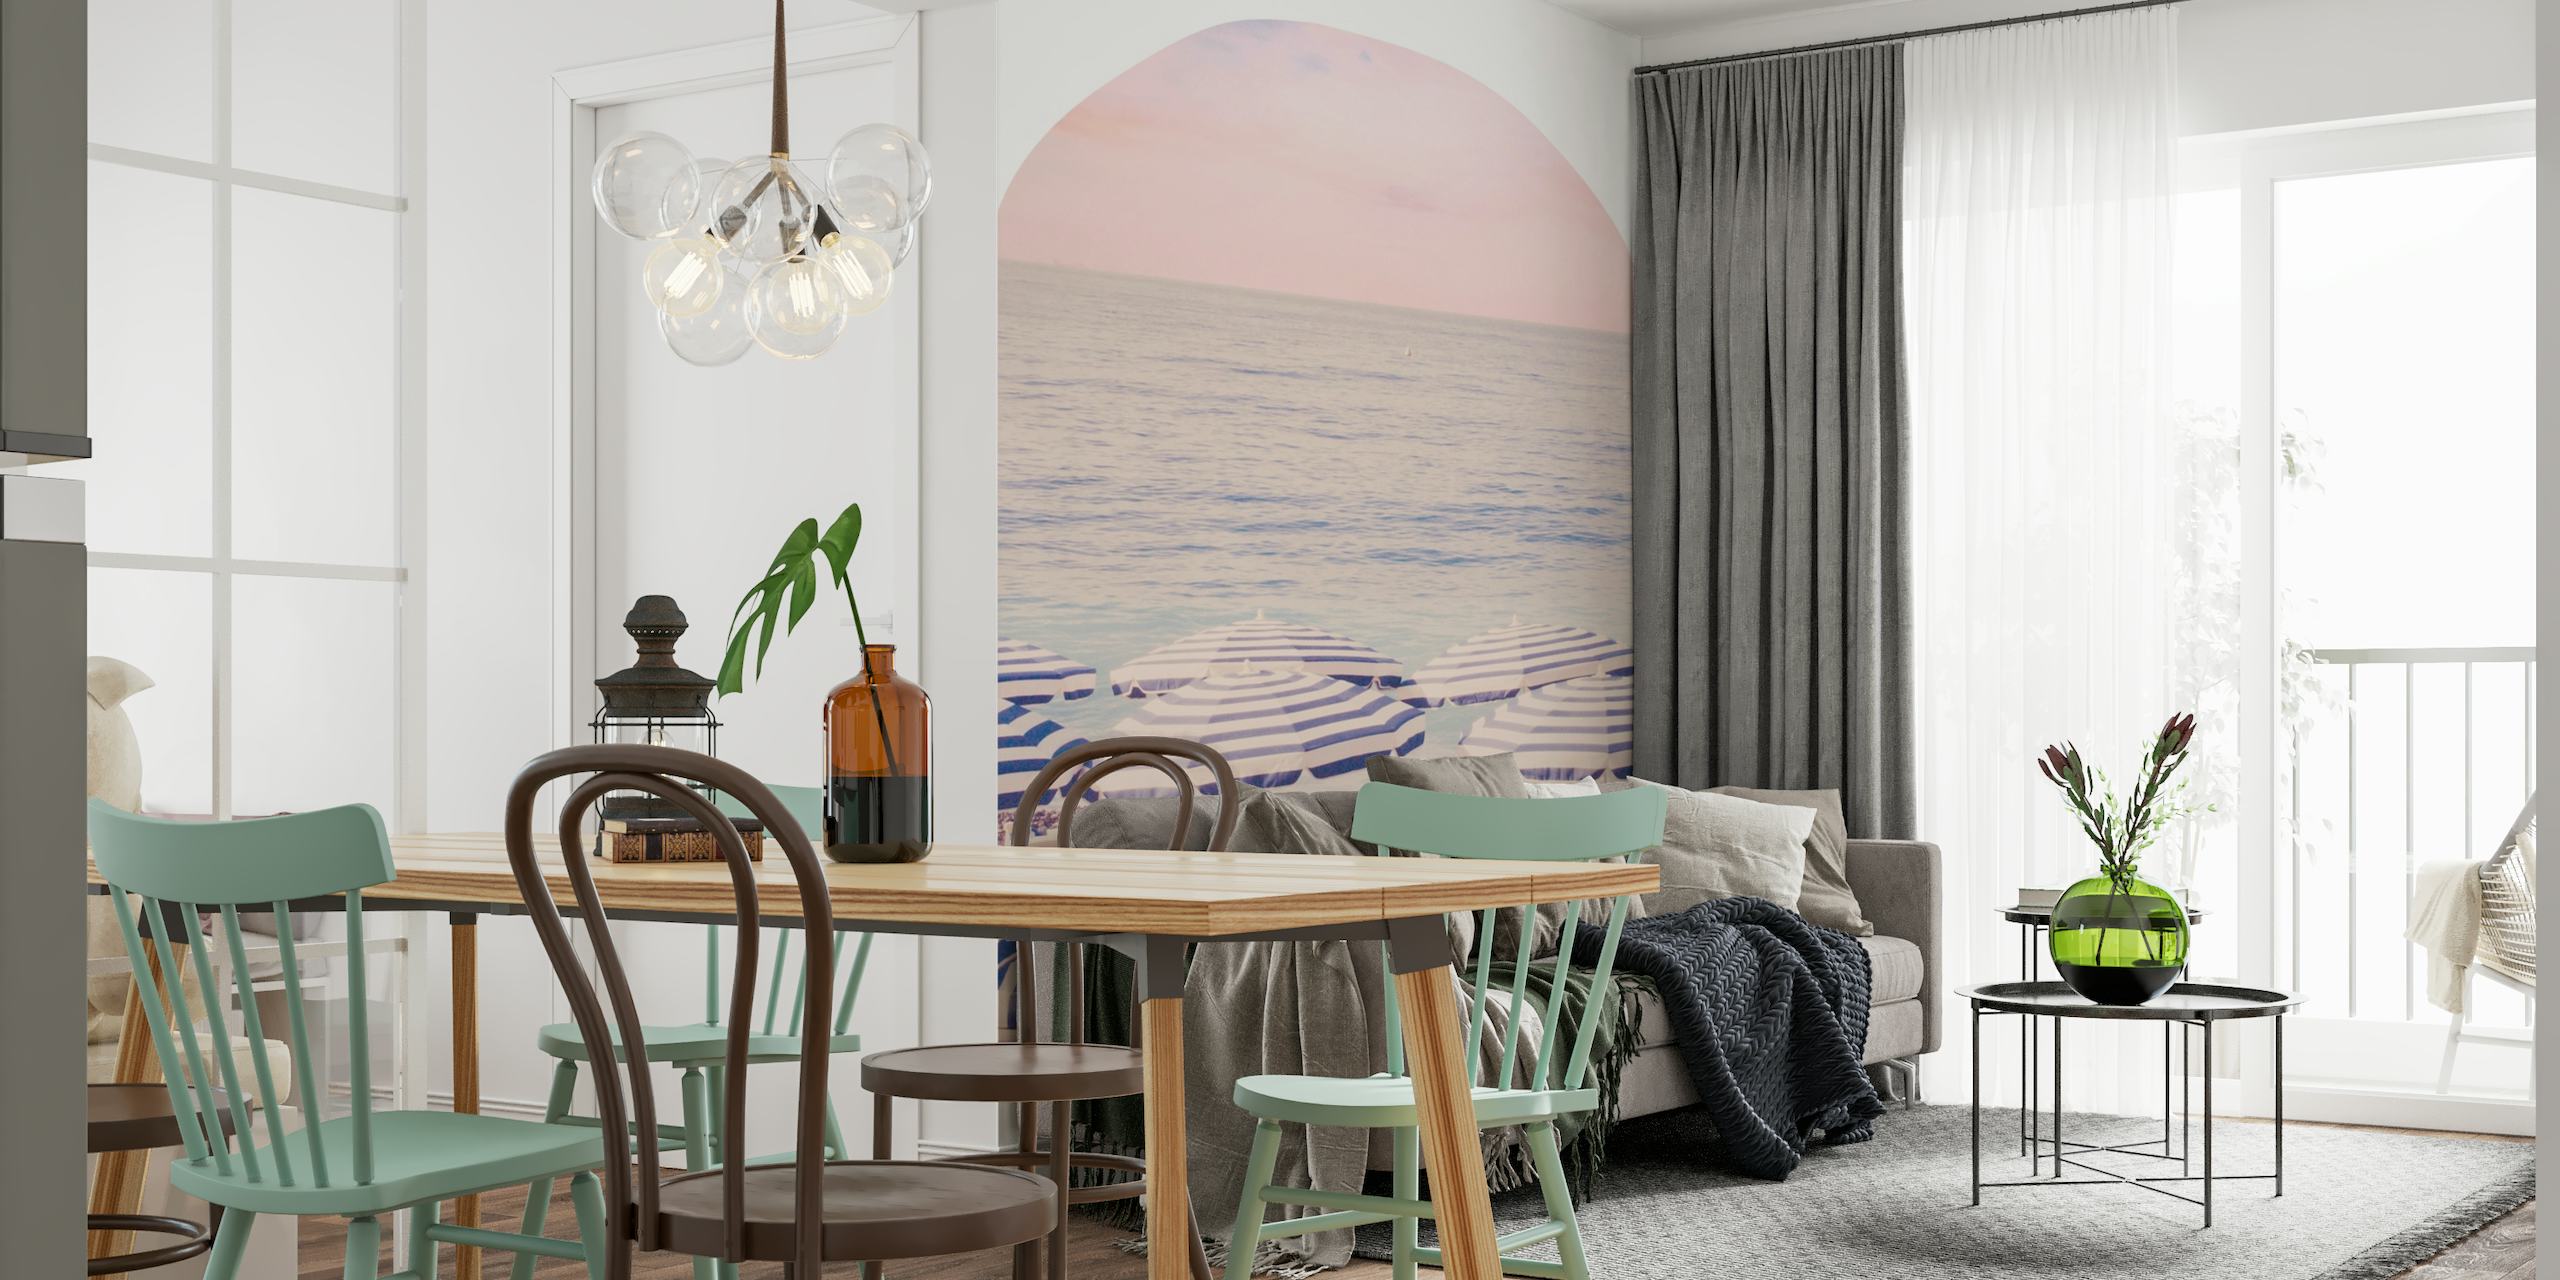 Pink Boho Beach Scene wall mural with pastel pink sky and blue striped beach umbrellas